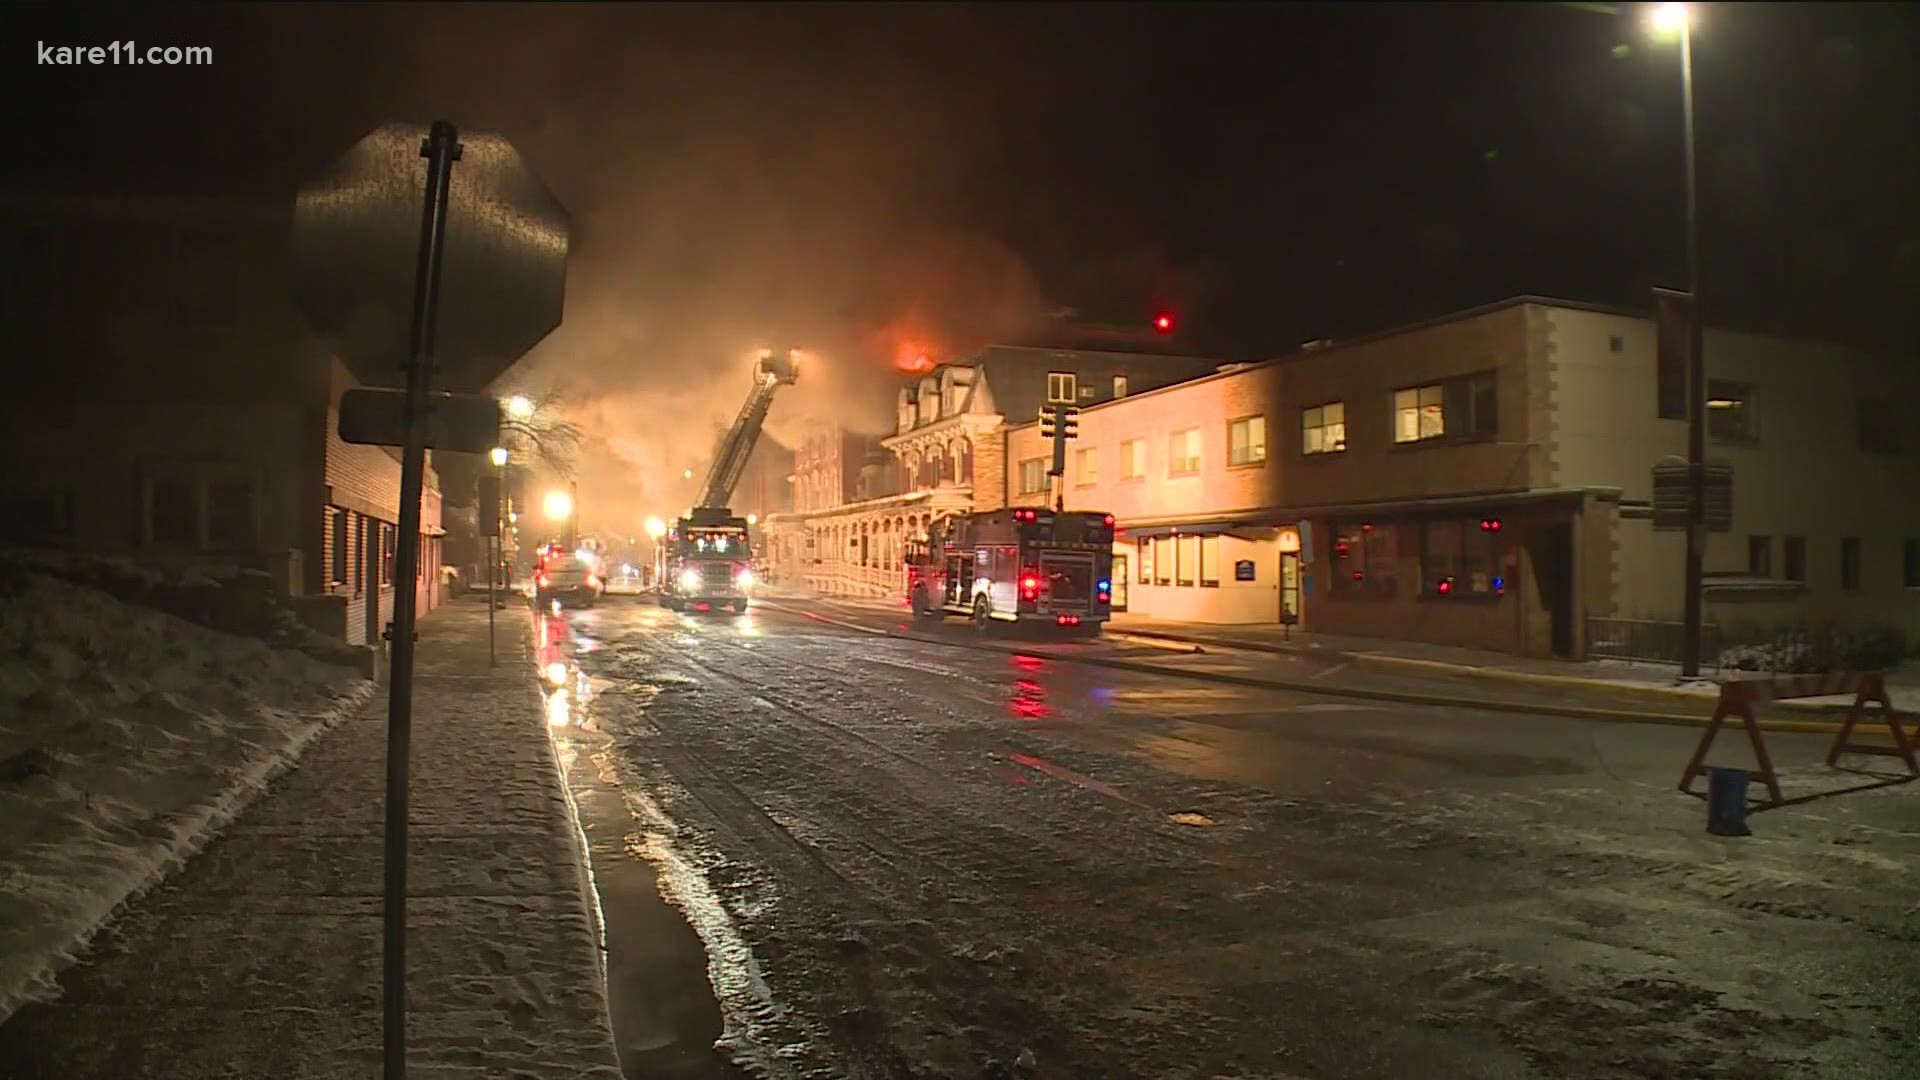 Firefighters battled the blaze at the 143-year-old building from Thursday afternoon well into Friday morning.